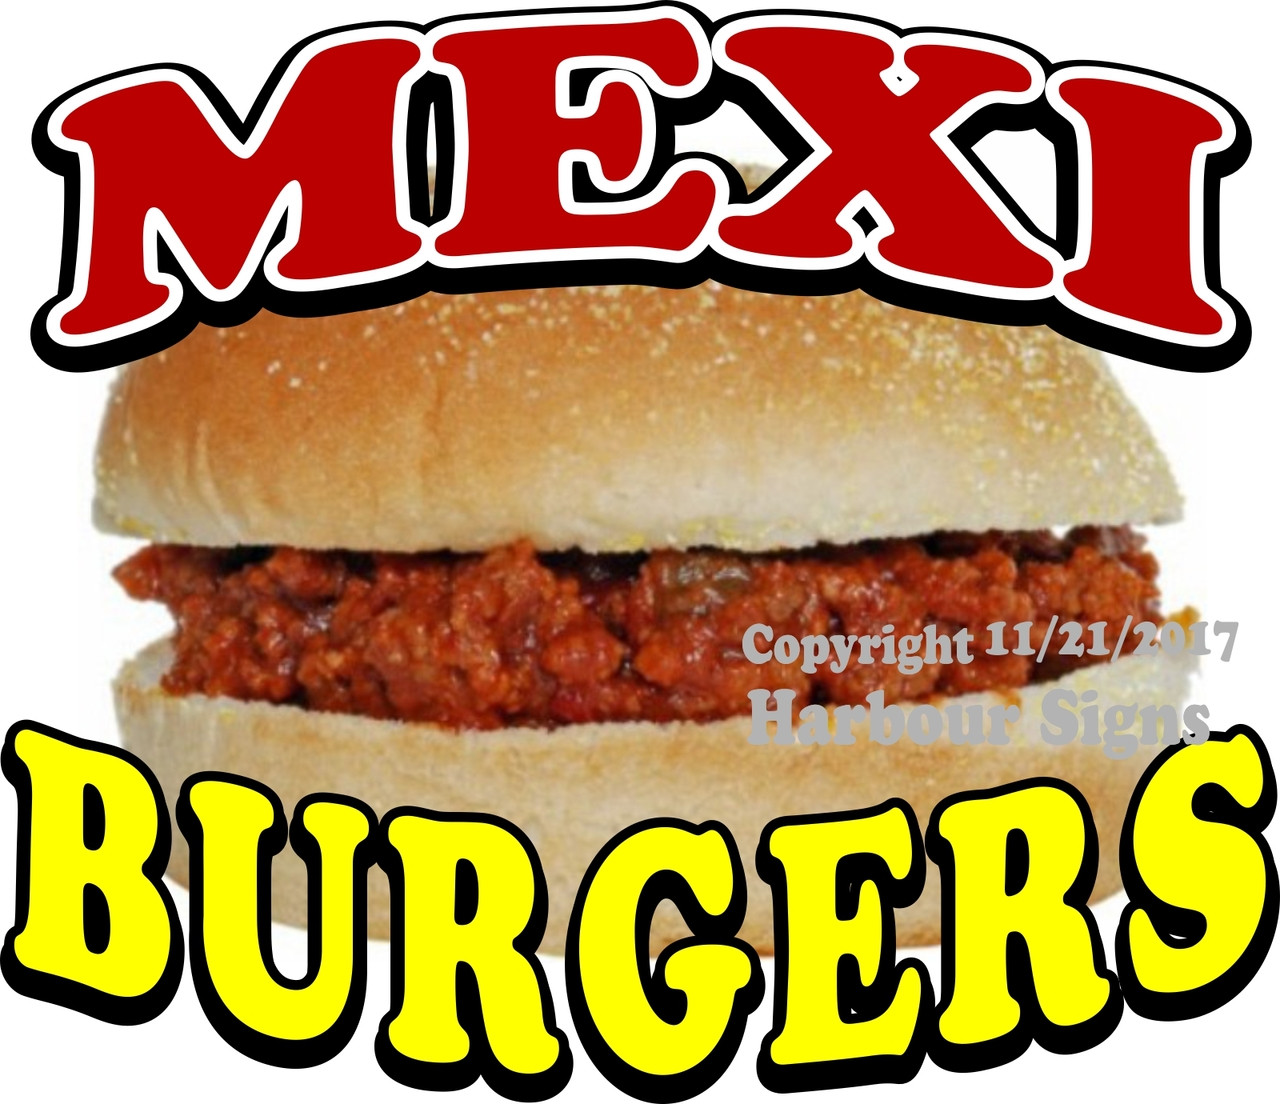 Mexi Burgers DECAL Choose Your Size Food Truck Concession Sticker